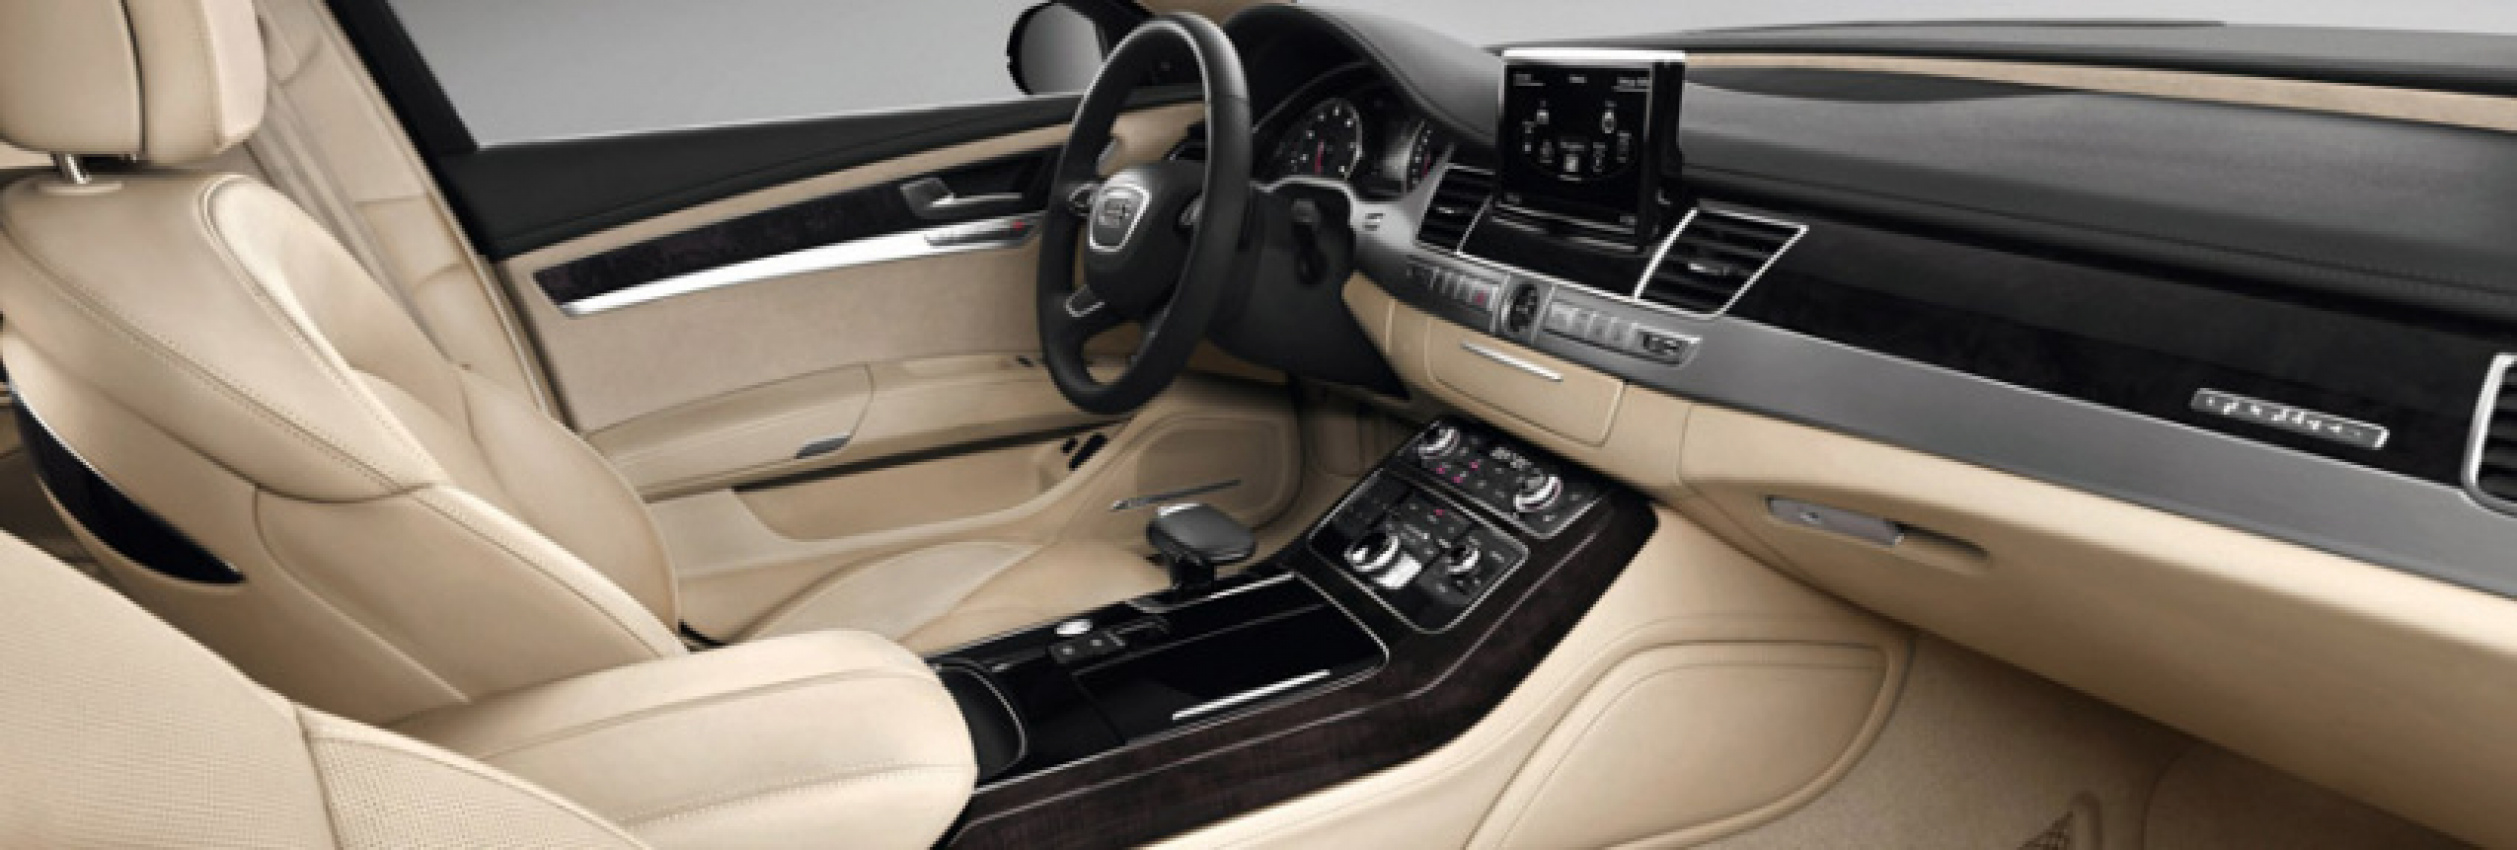 audi, autos, cars, audi a8, 2016 audi a8 security is here to set new standards for safety and security